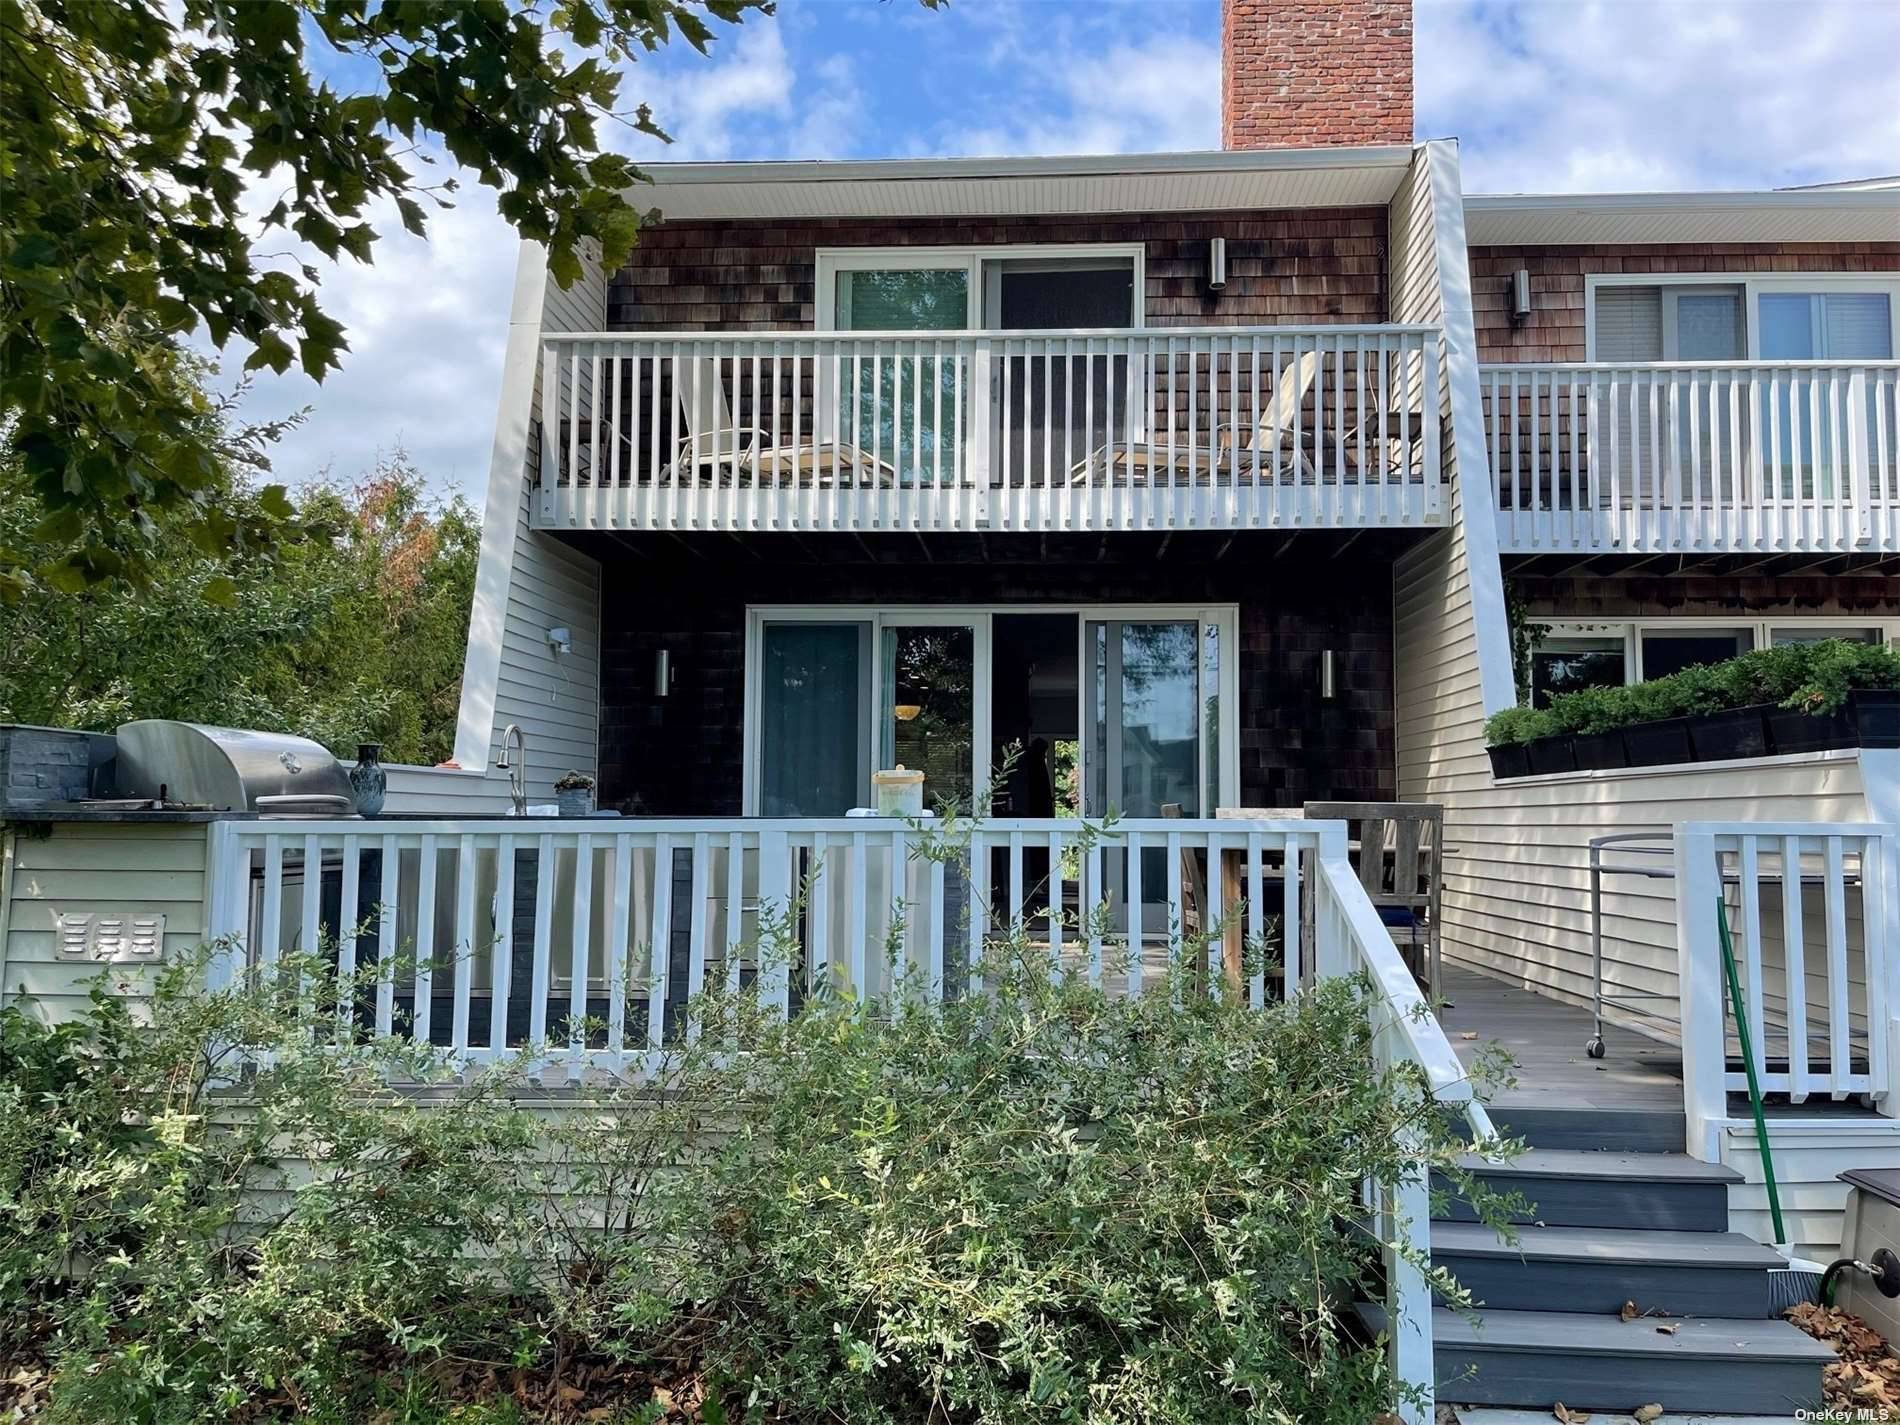 Located in the Village of Westhampton Beach this 1400sf Townhouse offers living room with fireplace, dining area, kitchen, powder room, 2 ensuite bedrooms, full basement, balcony, decking, outside kitchen and ...